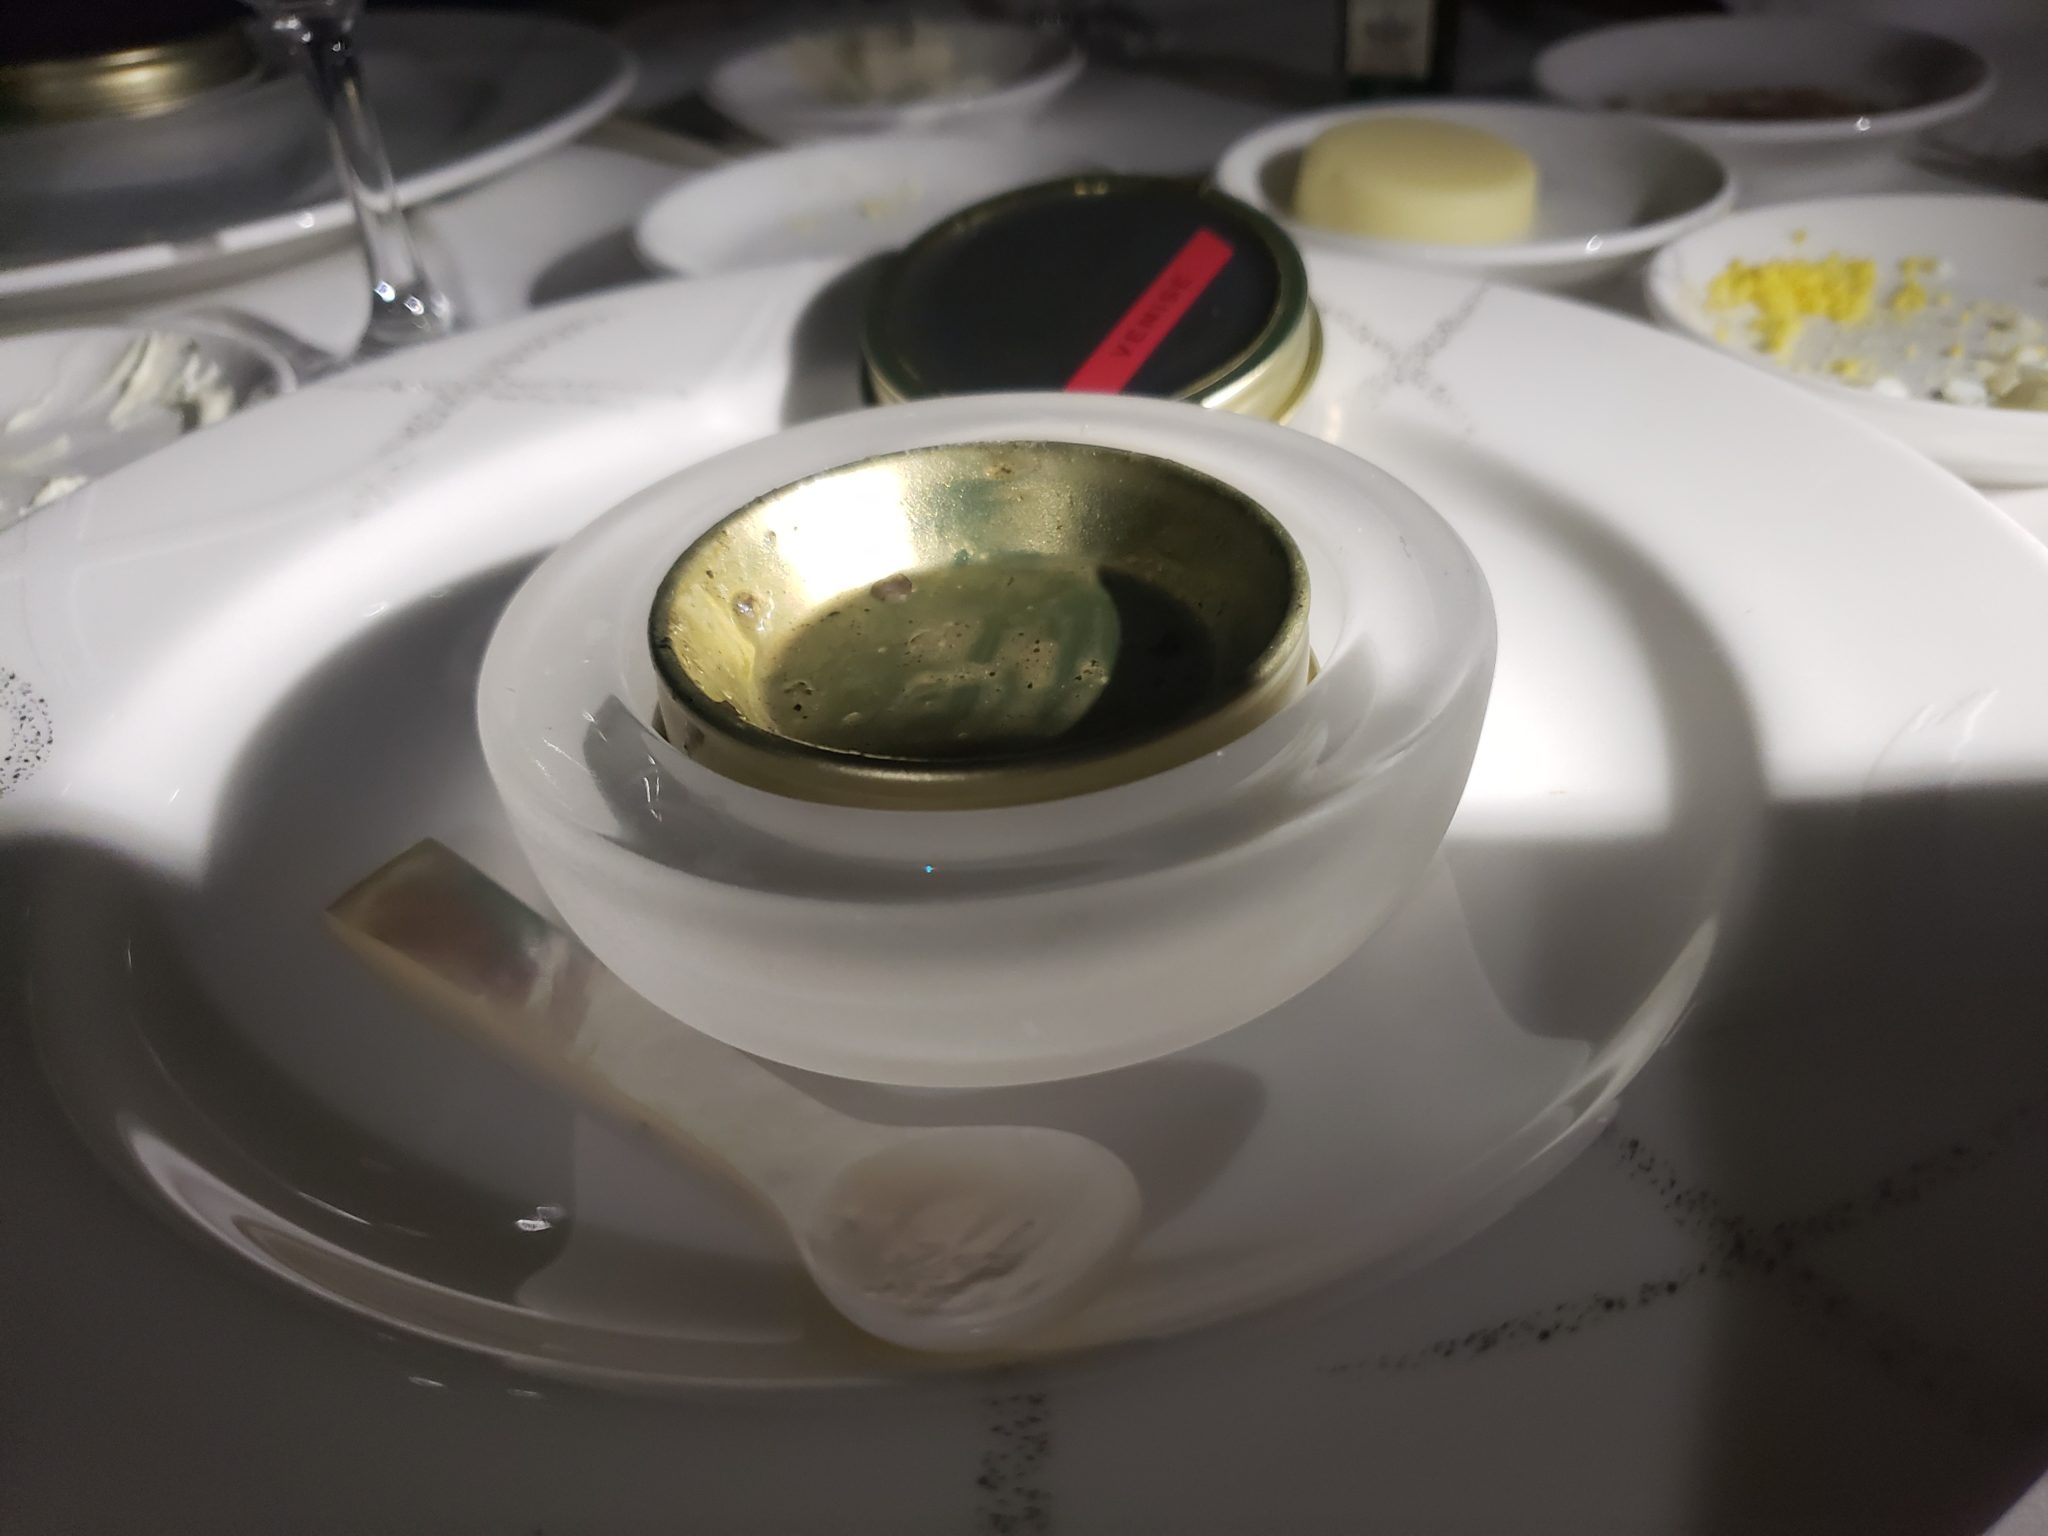 a plate with a glass bowl and a spoon on it